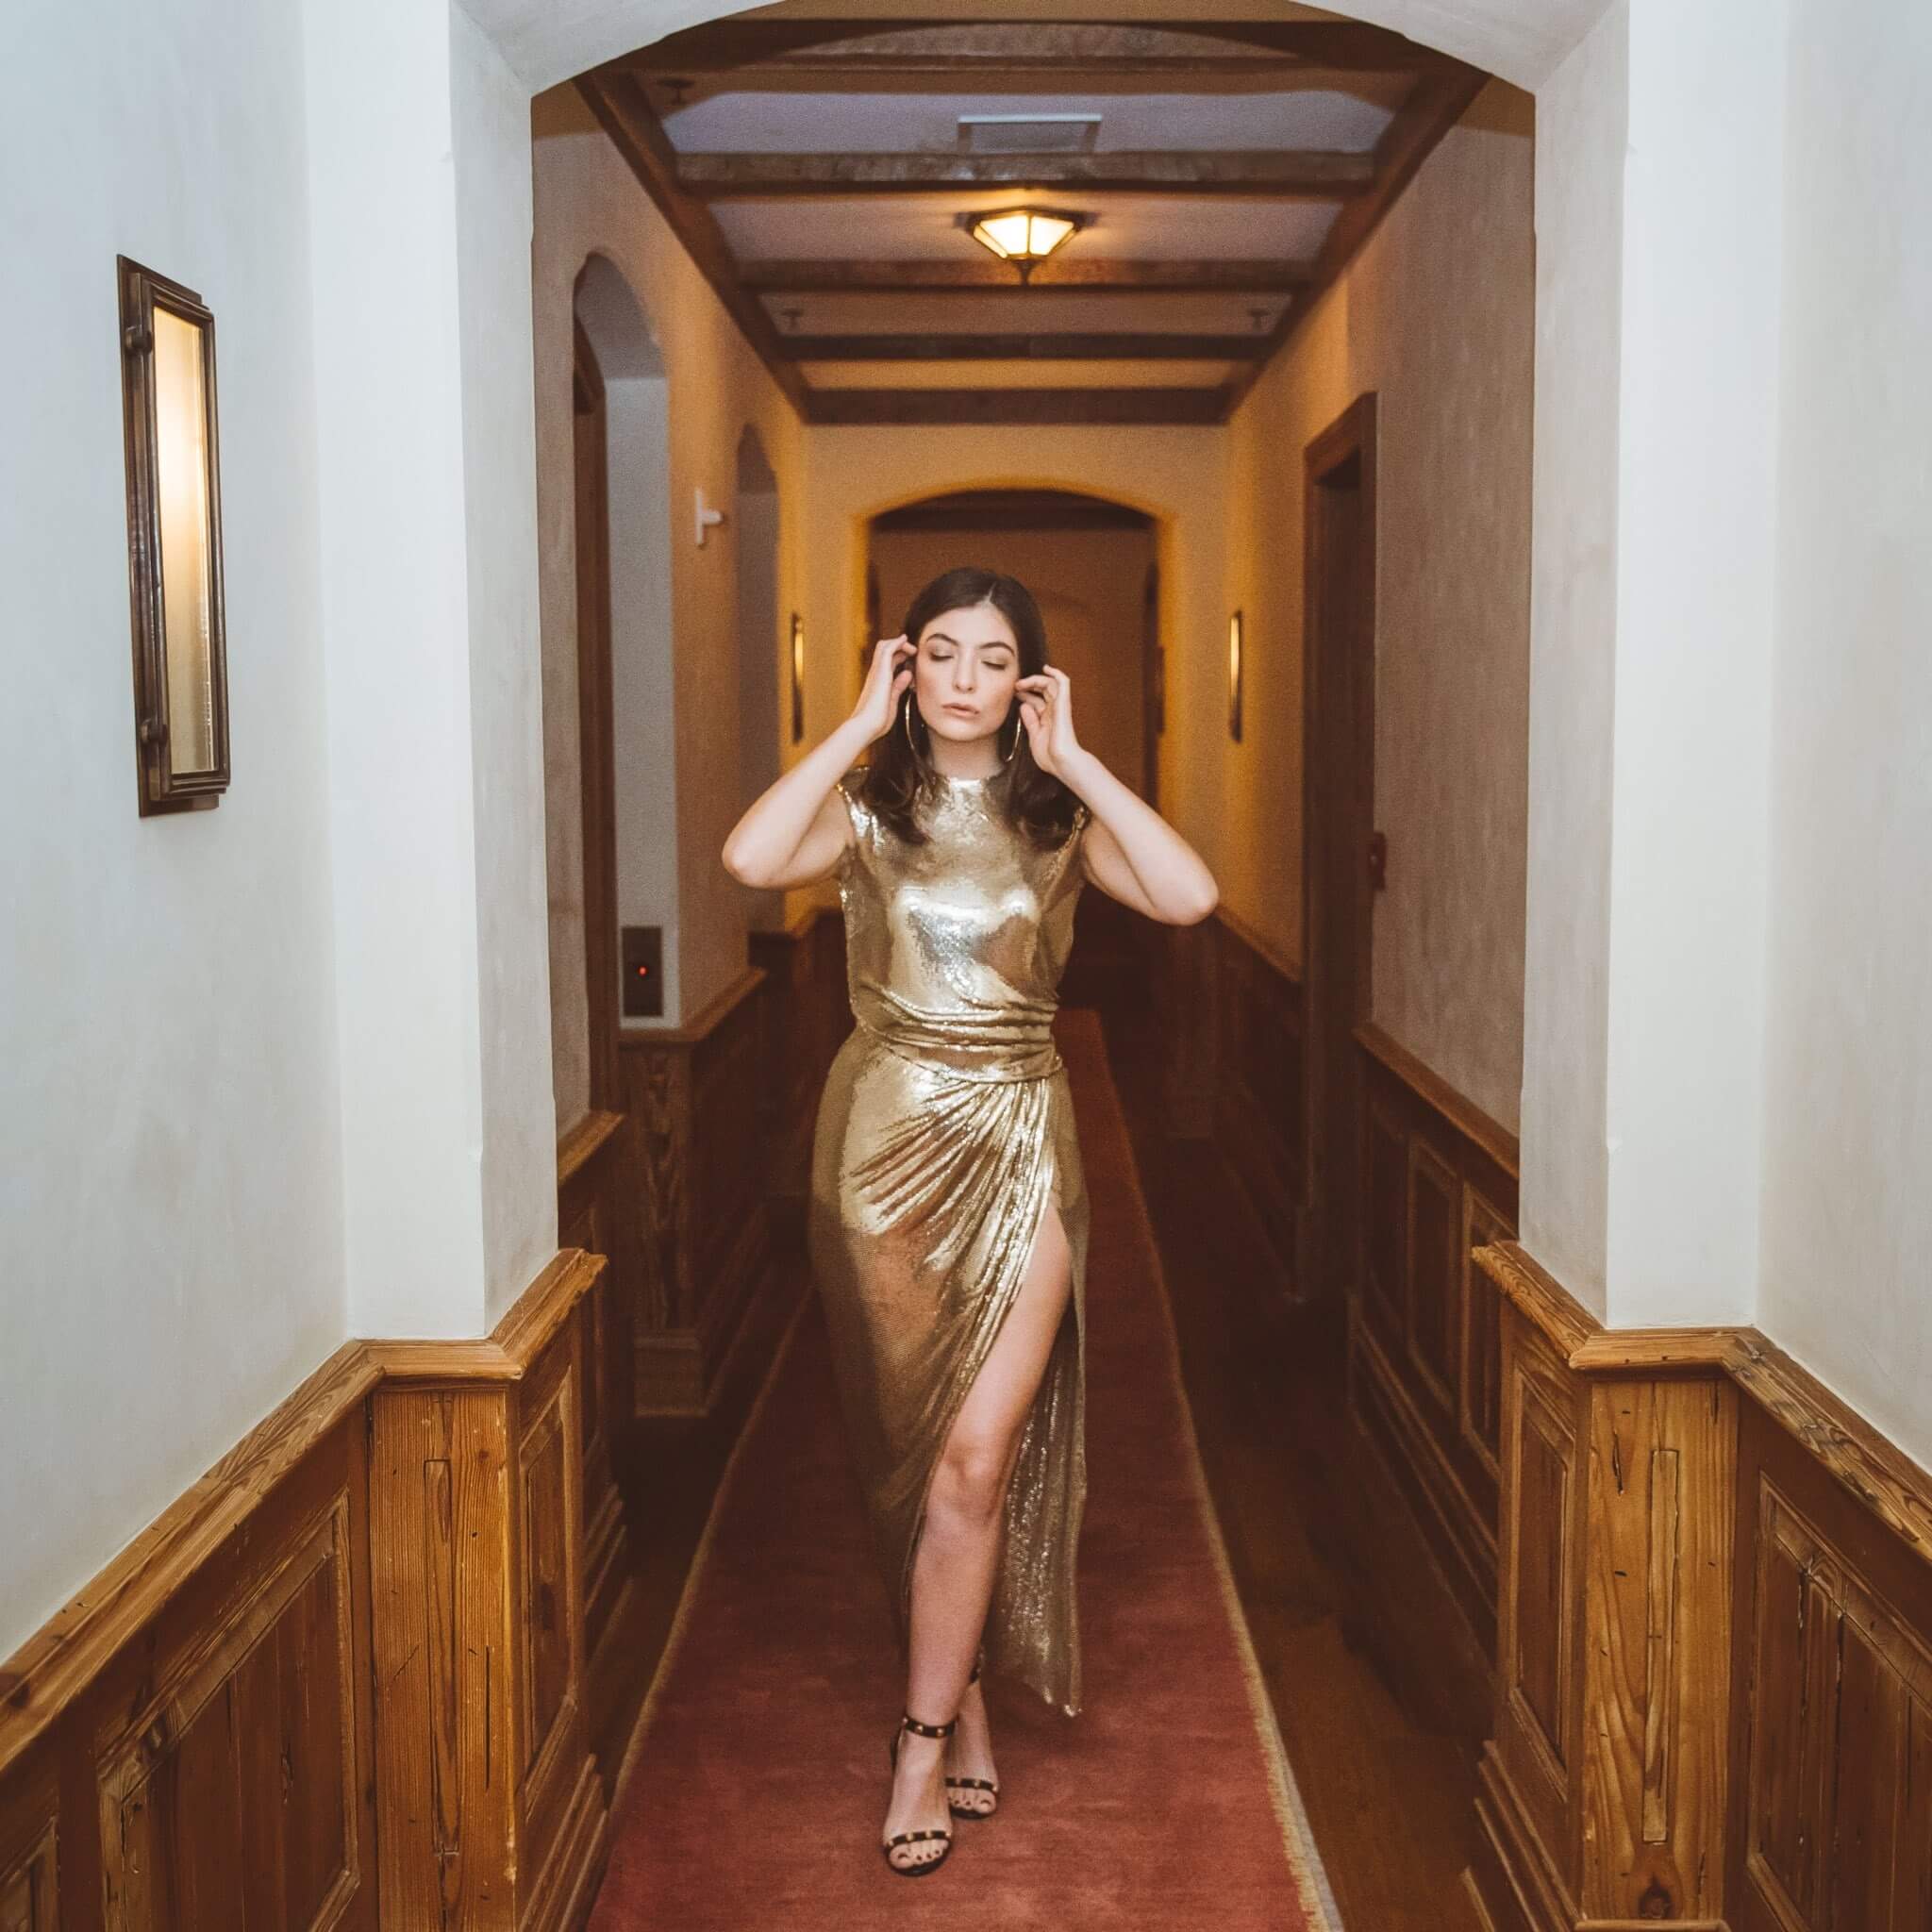 50 Hot Lorde Photos Will Make Your Day Even Better - 12thBlog